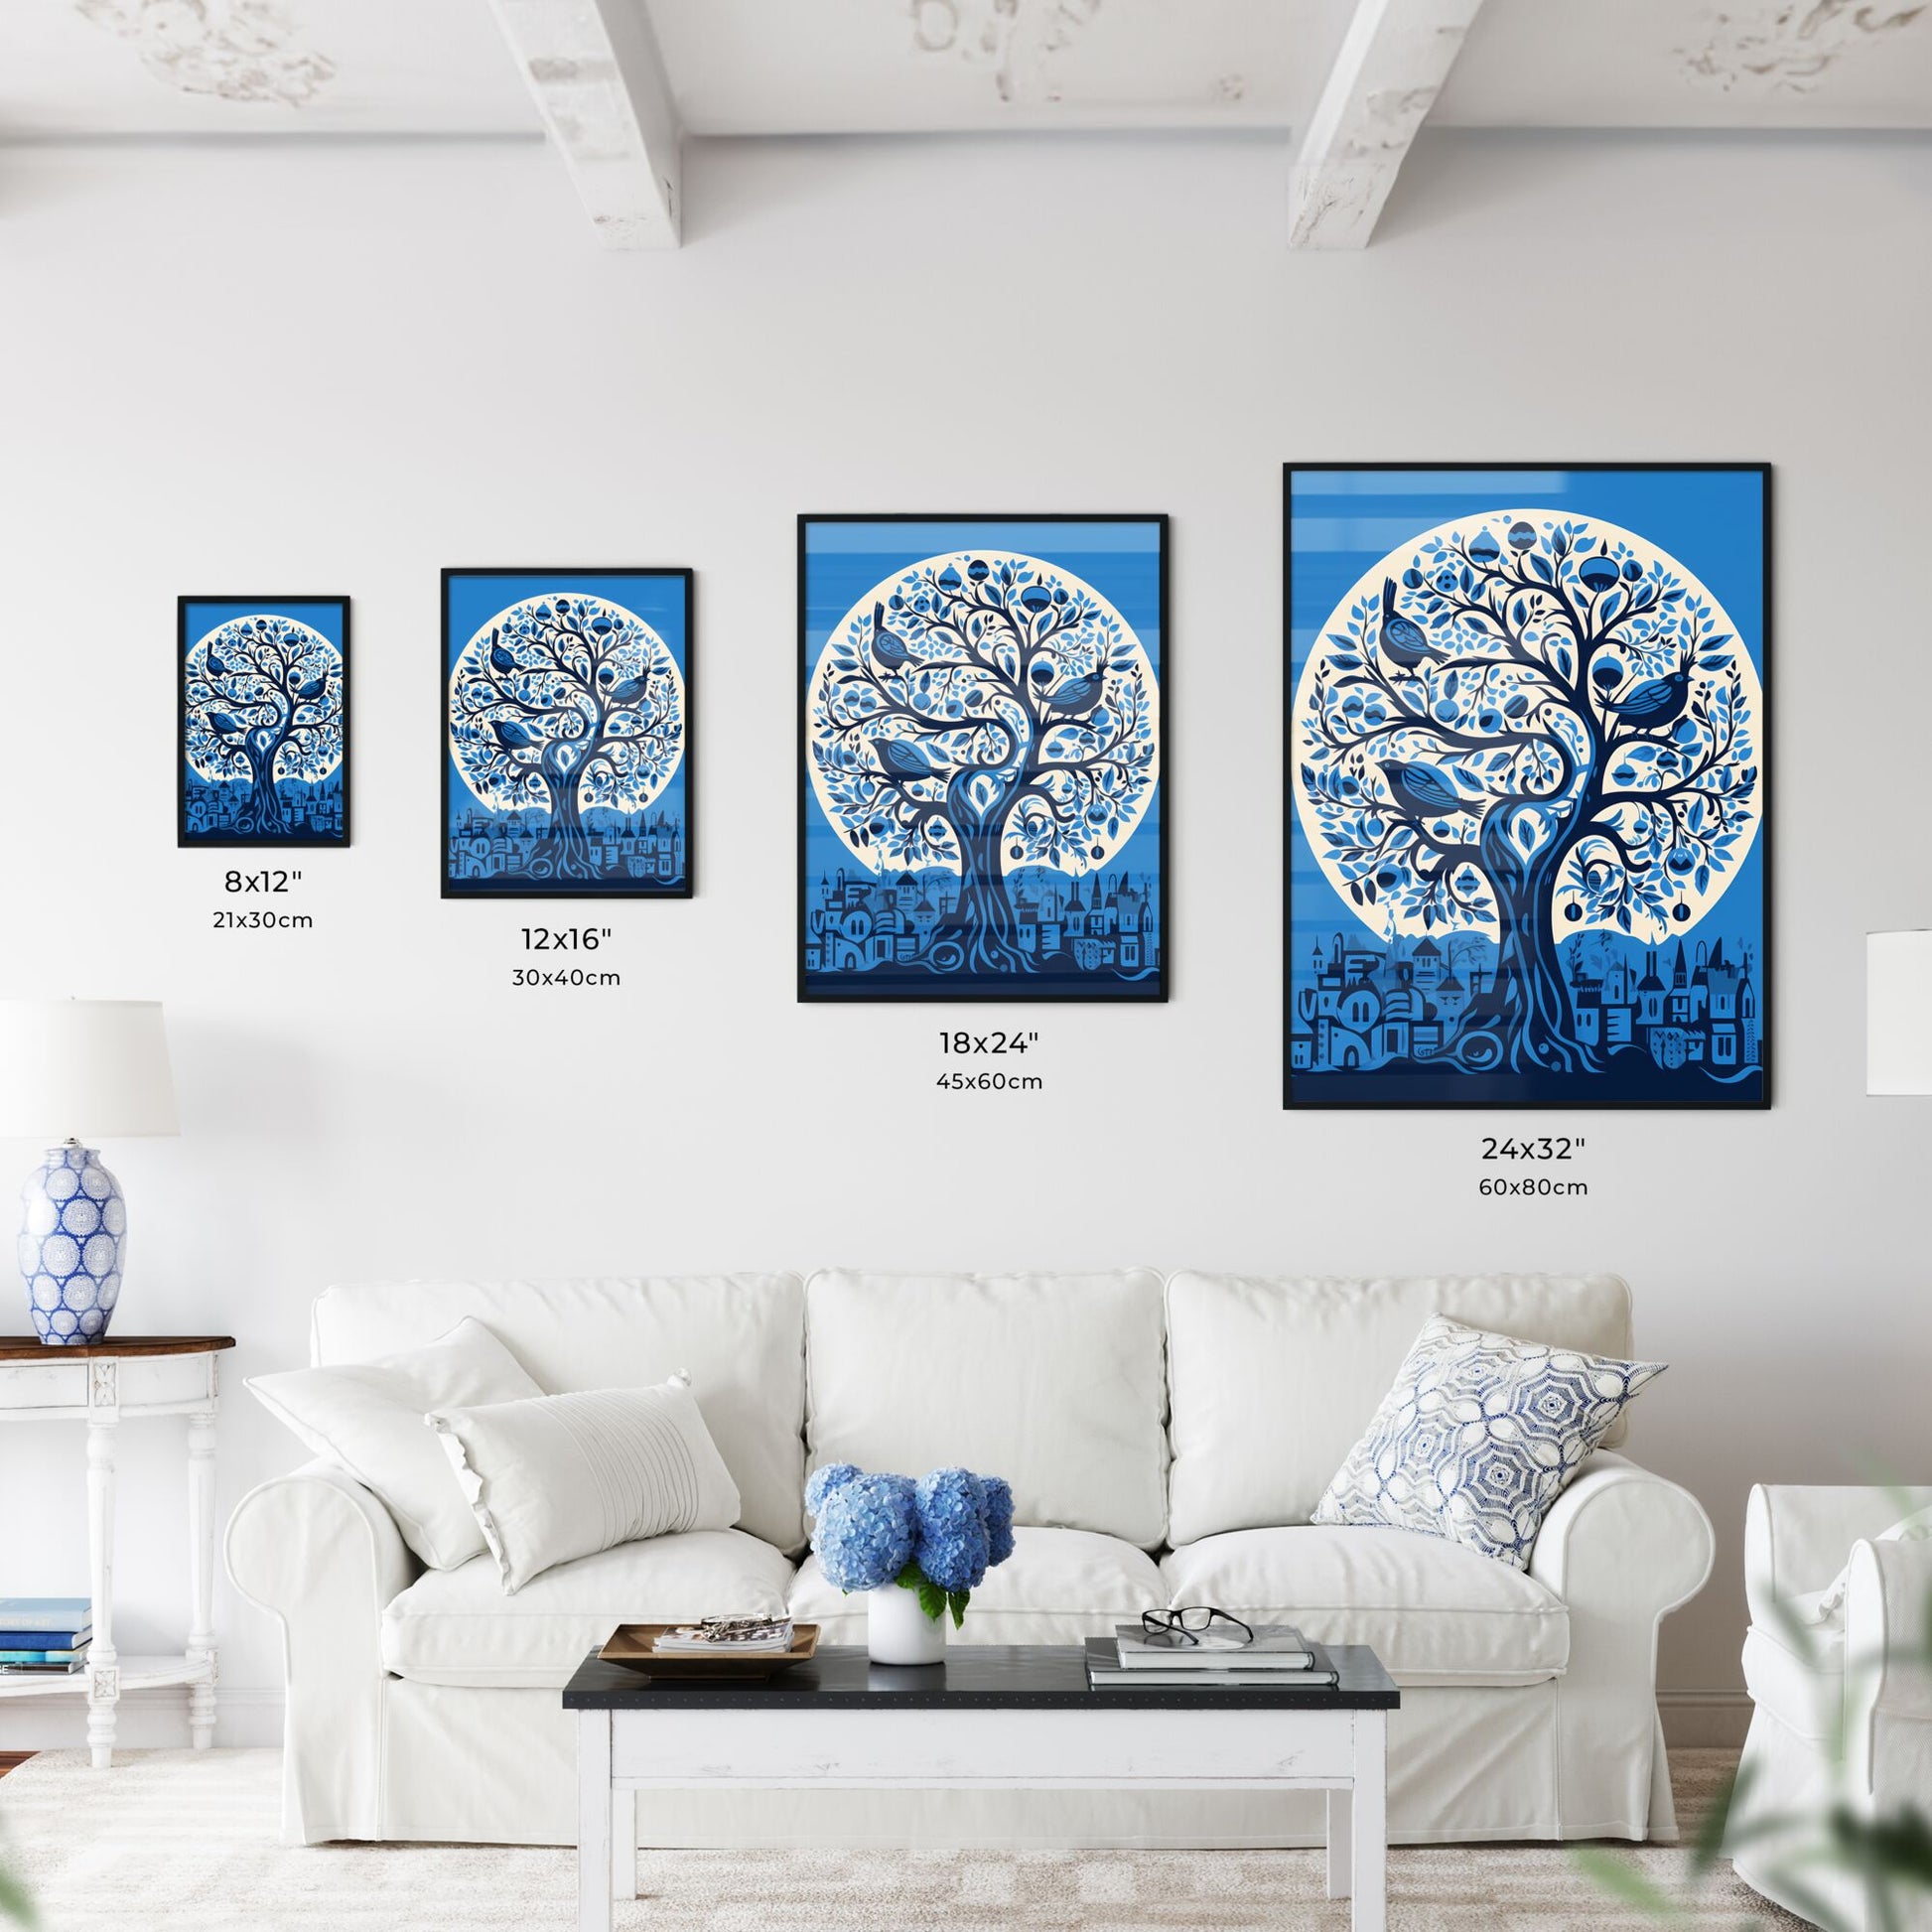 A Poster of electric blue Israel - A Blue Tree With Birds On It Default Title